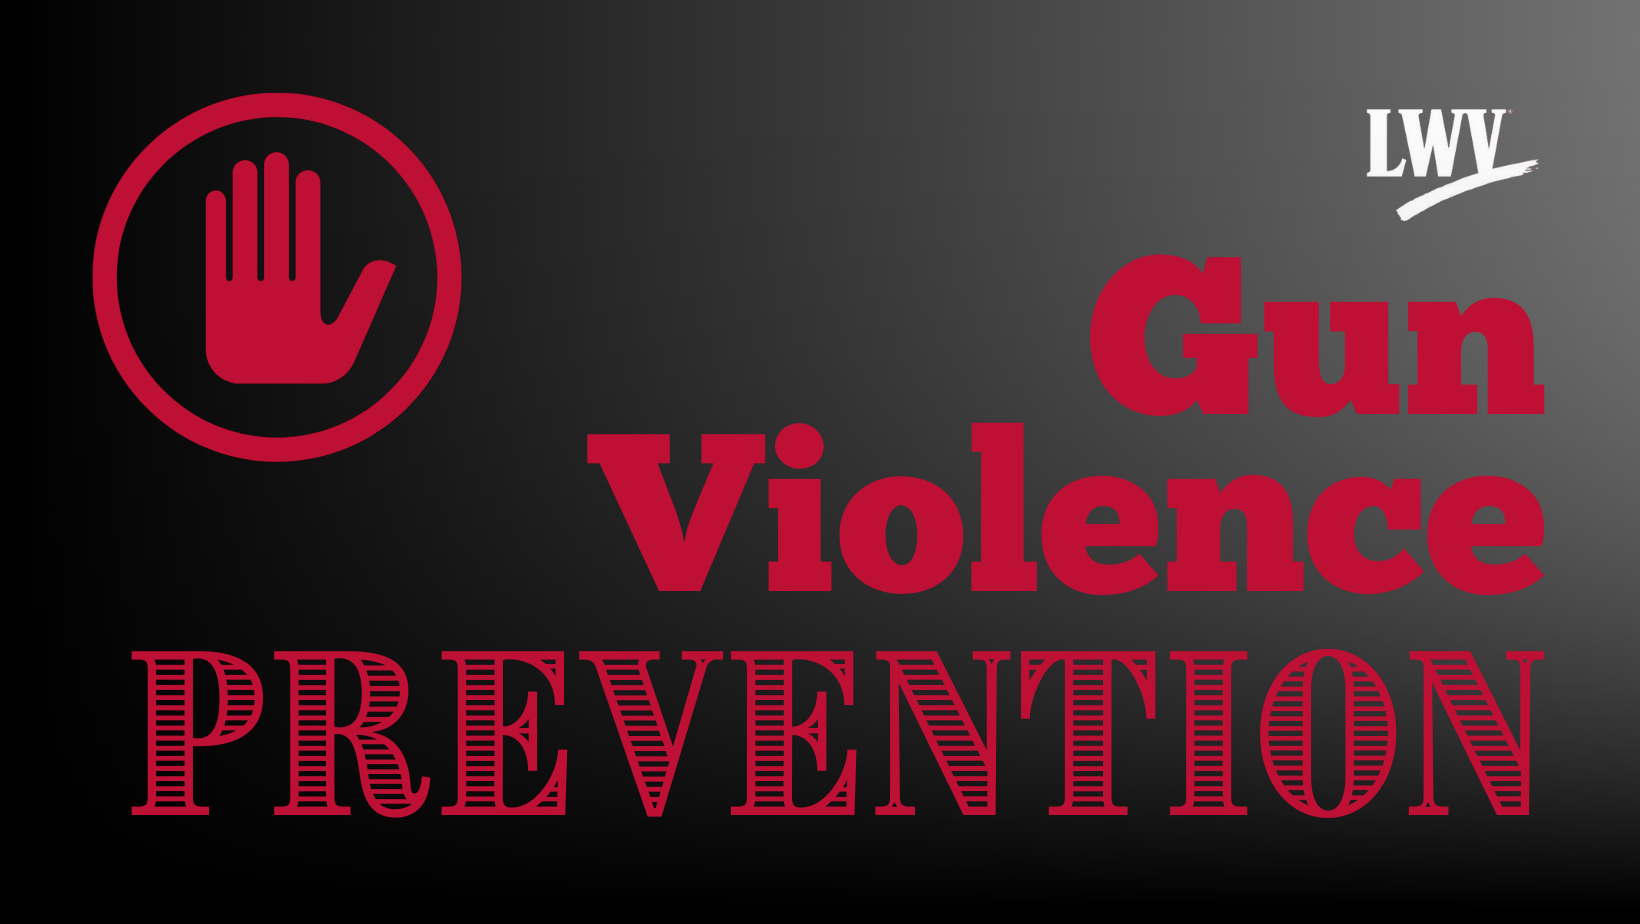 Red Gun Violence Prevention text on black to gray background with red circle around a hand on the left